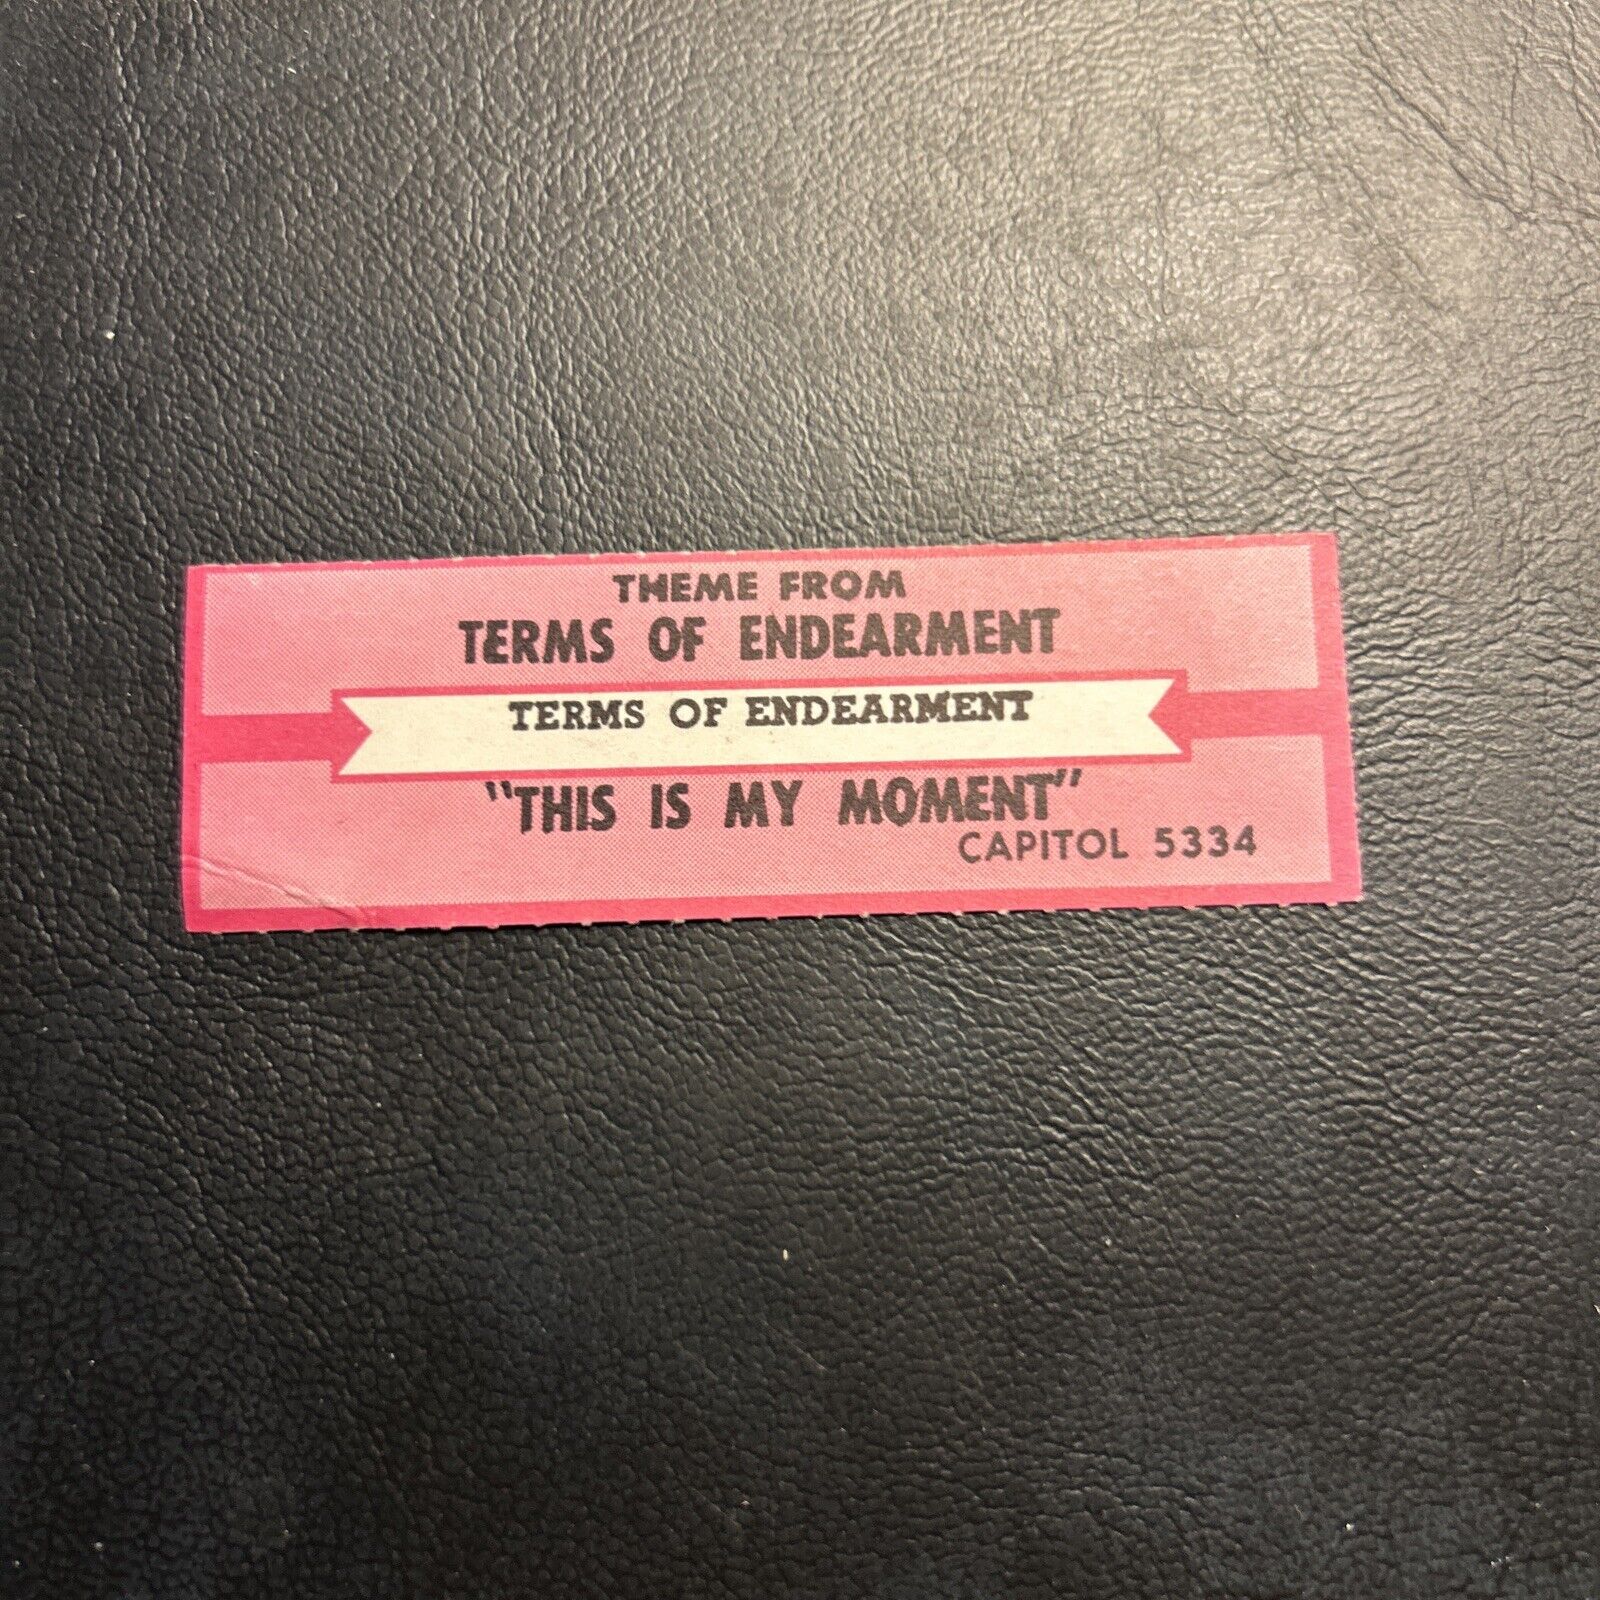 1 JUKEBOX TITLE STRIP Theme From Terms Of Endearment. This Is My Moment 45.